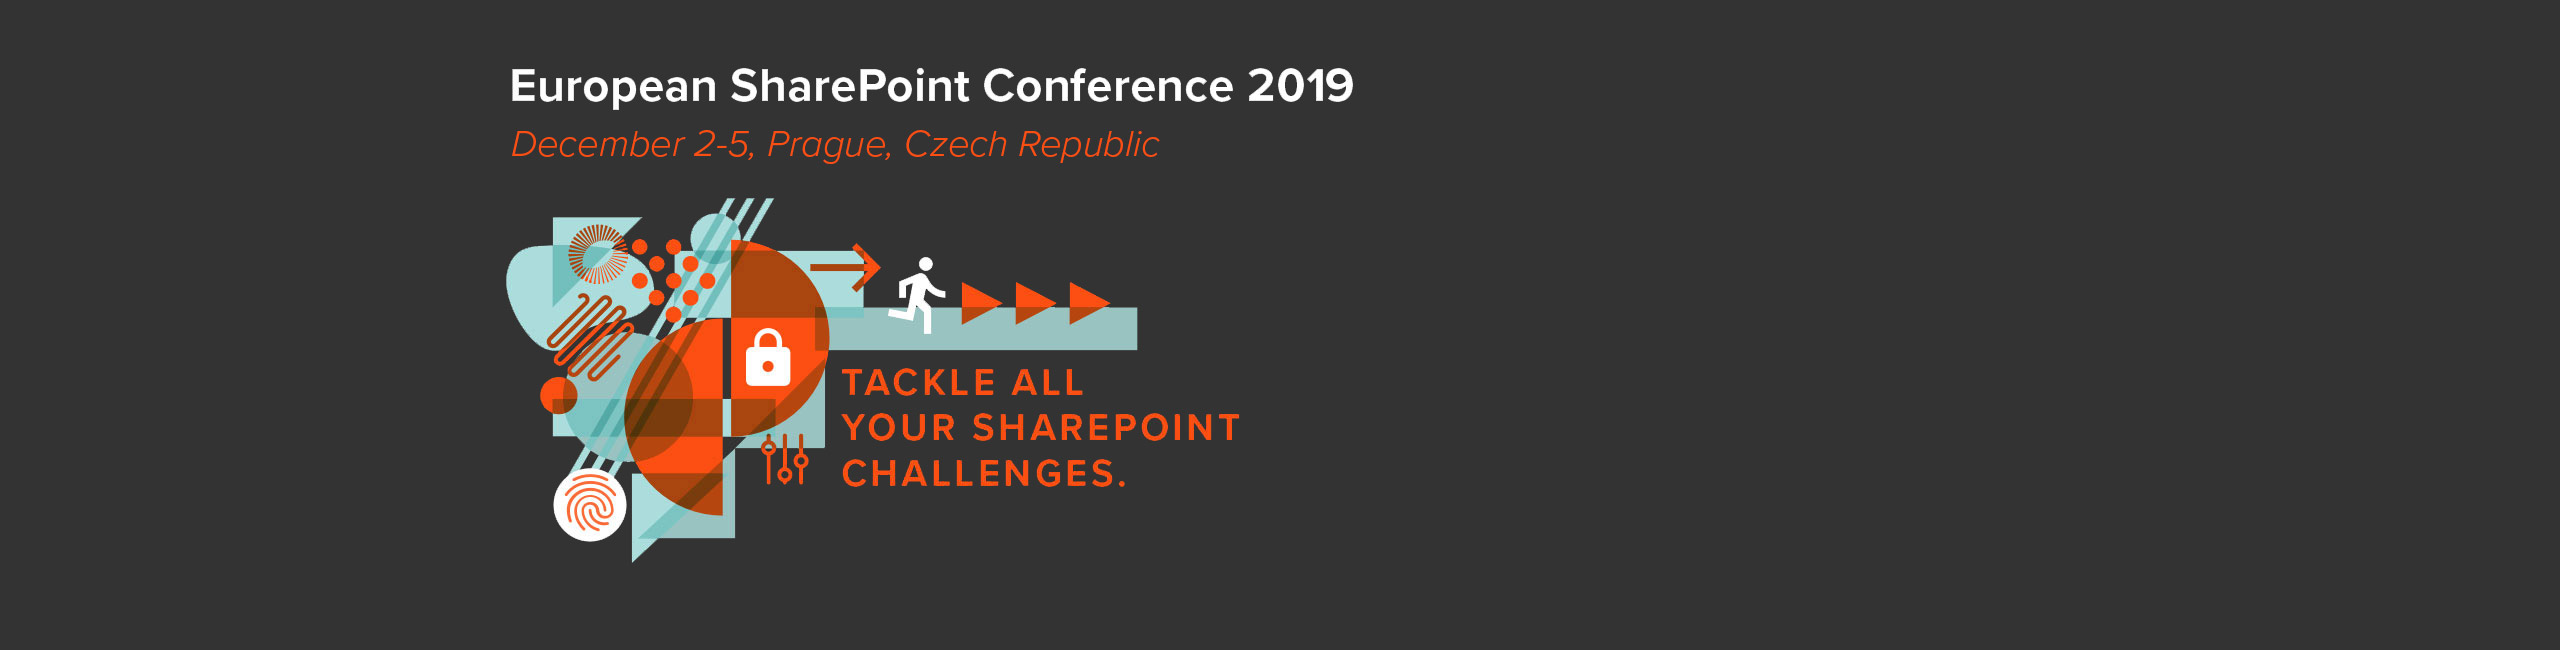 European SharePoint Conference 2019